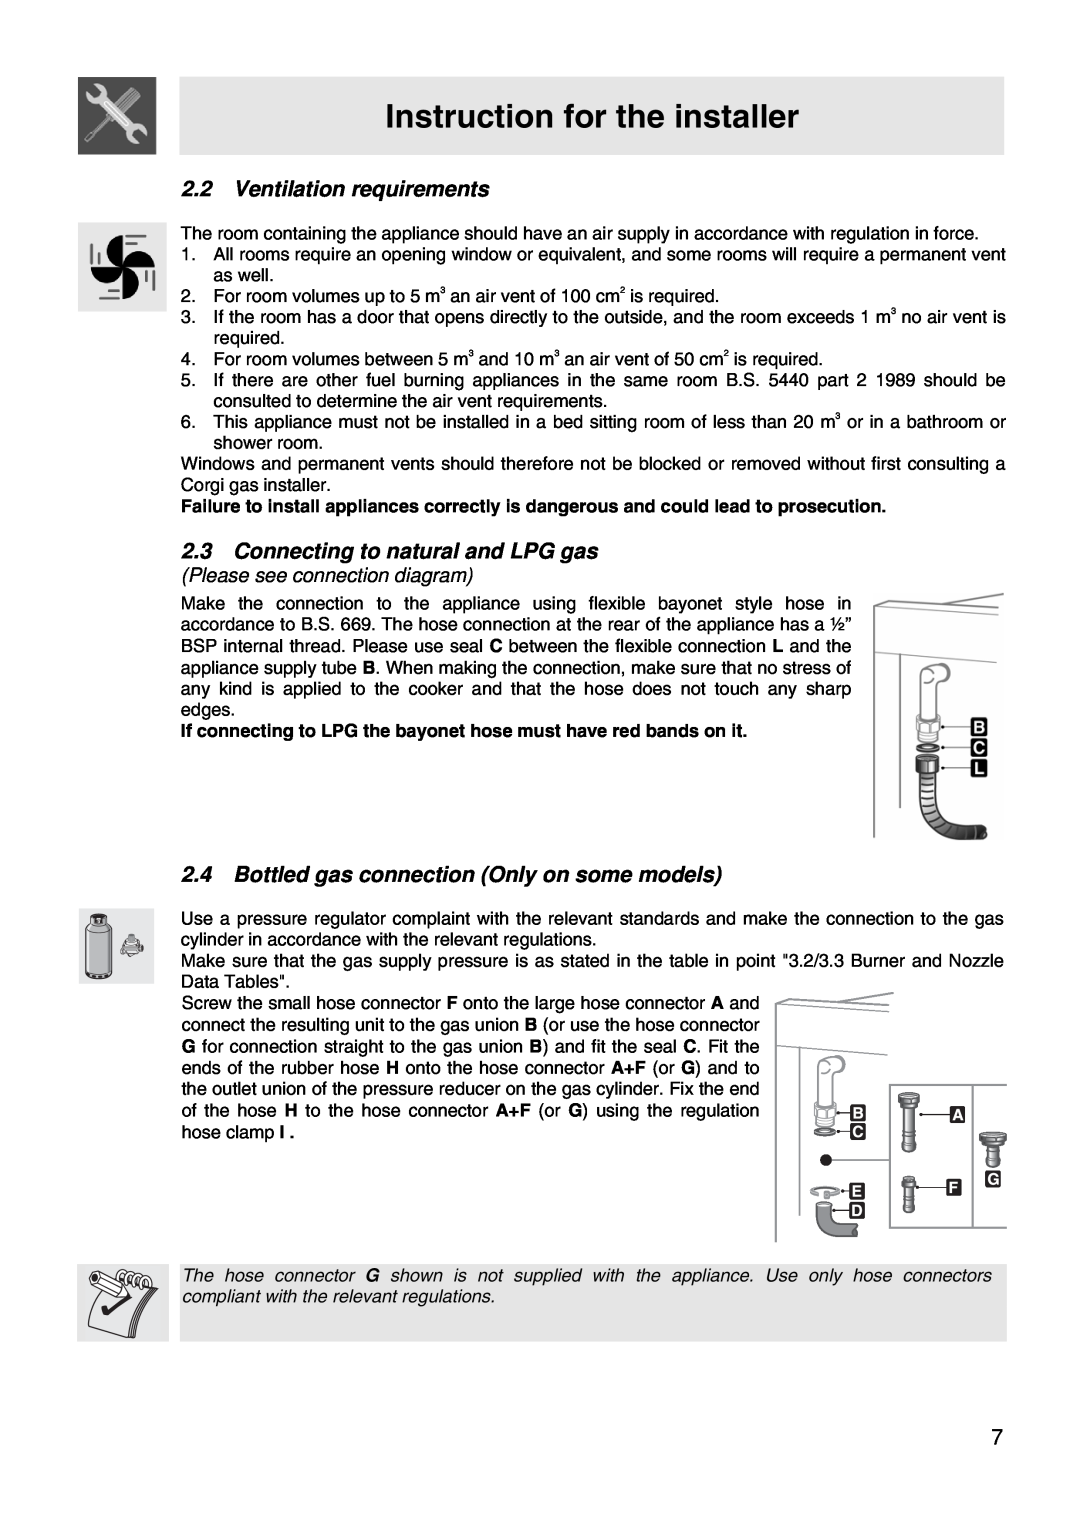 Smeg WIL61BVM manual 2.2Ventilation requirements, 2.3Connecting to natural and LPG gas, Instruction for the installer 